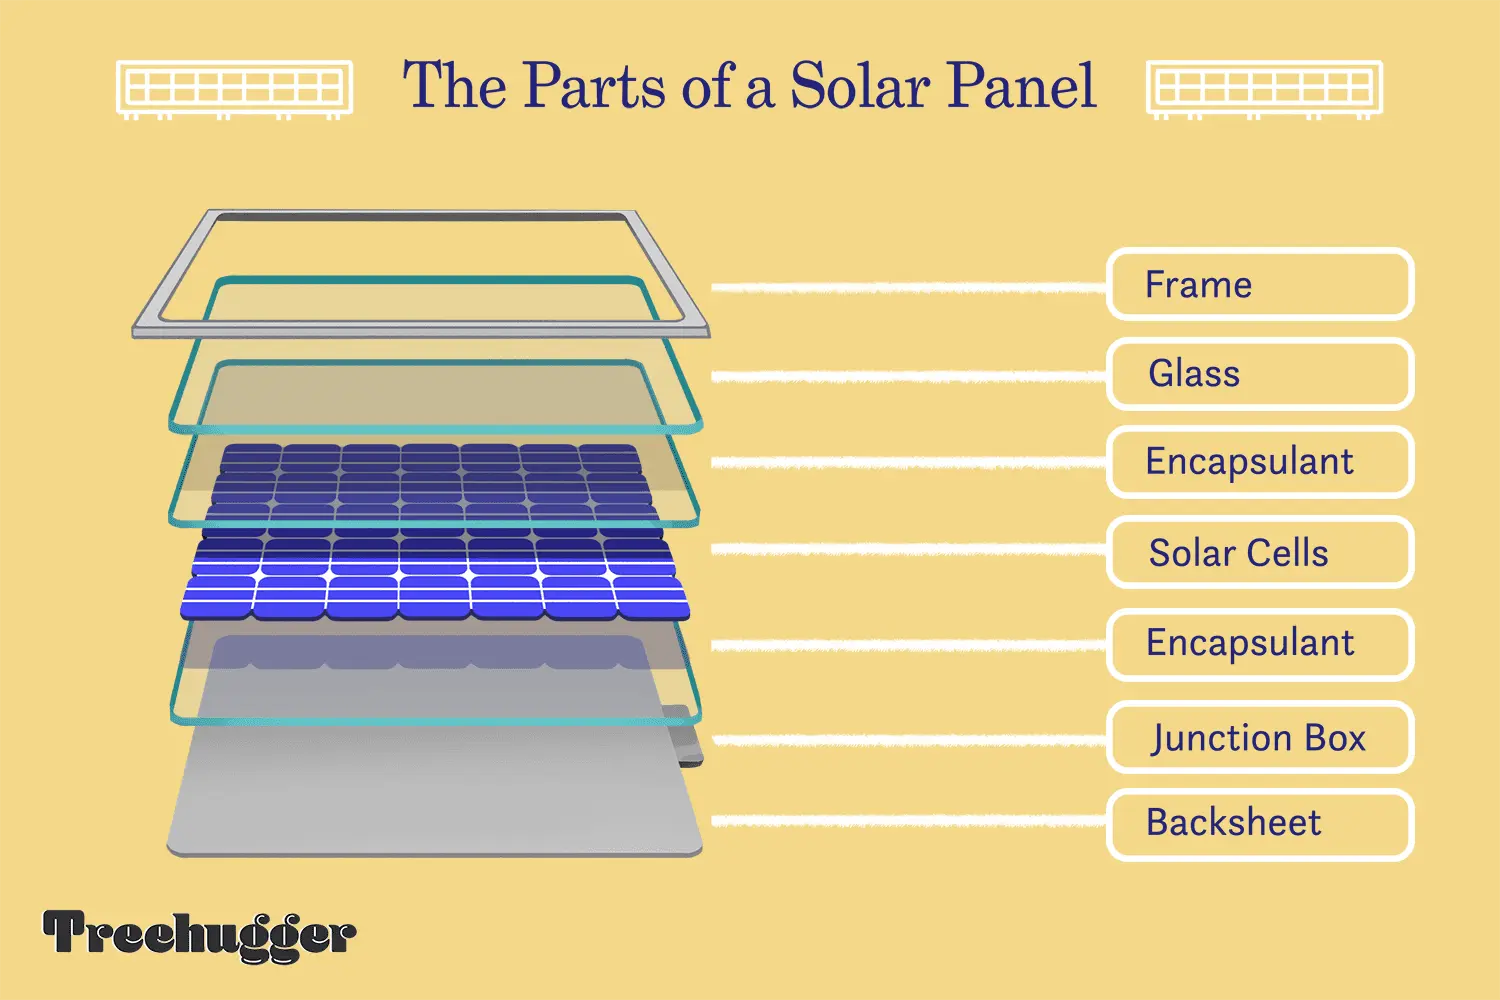 solar panel main components - What are the major solar components